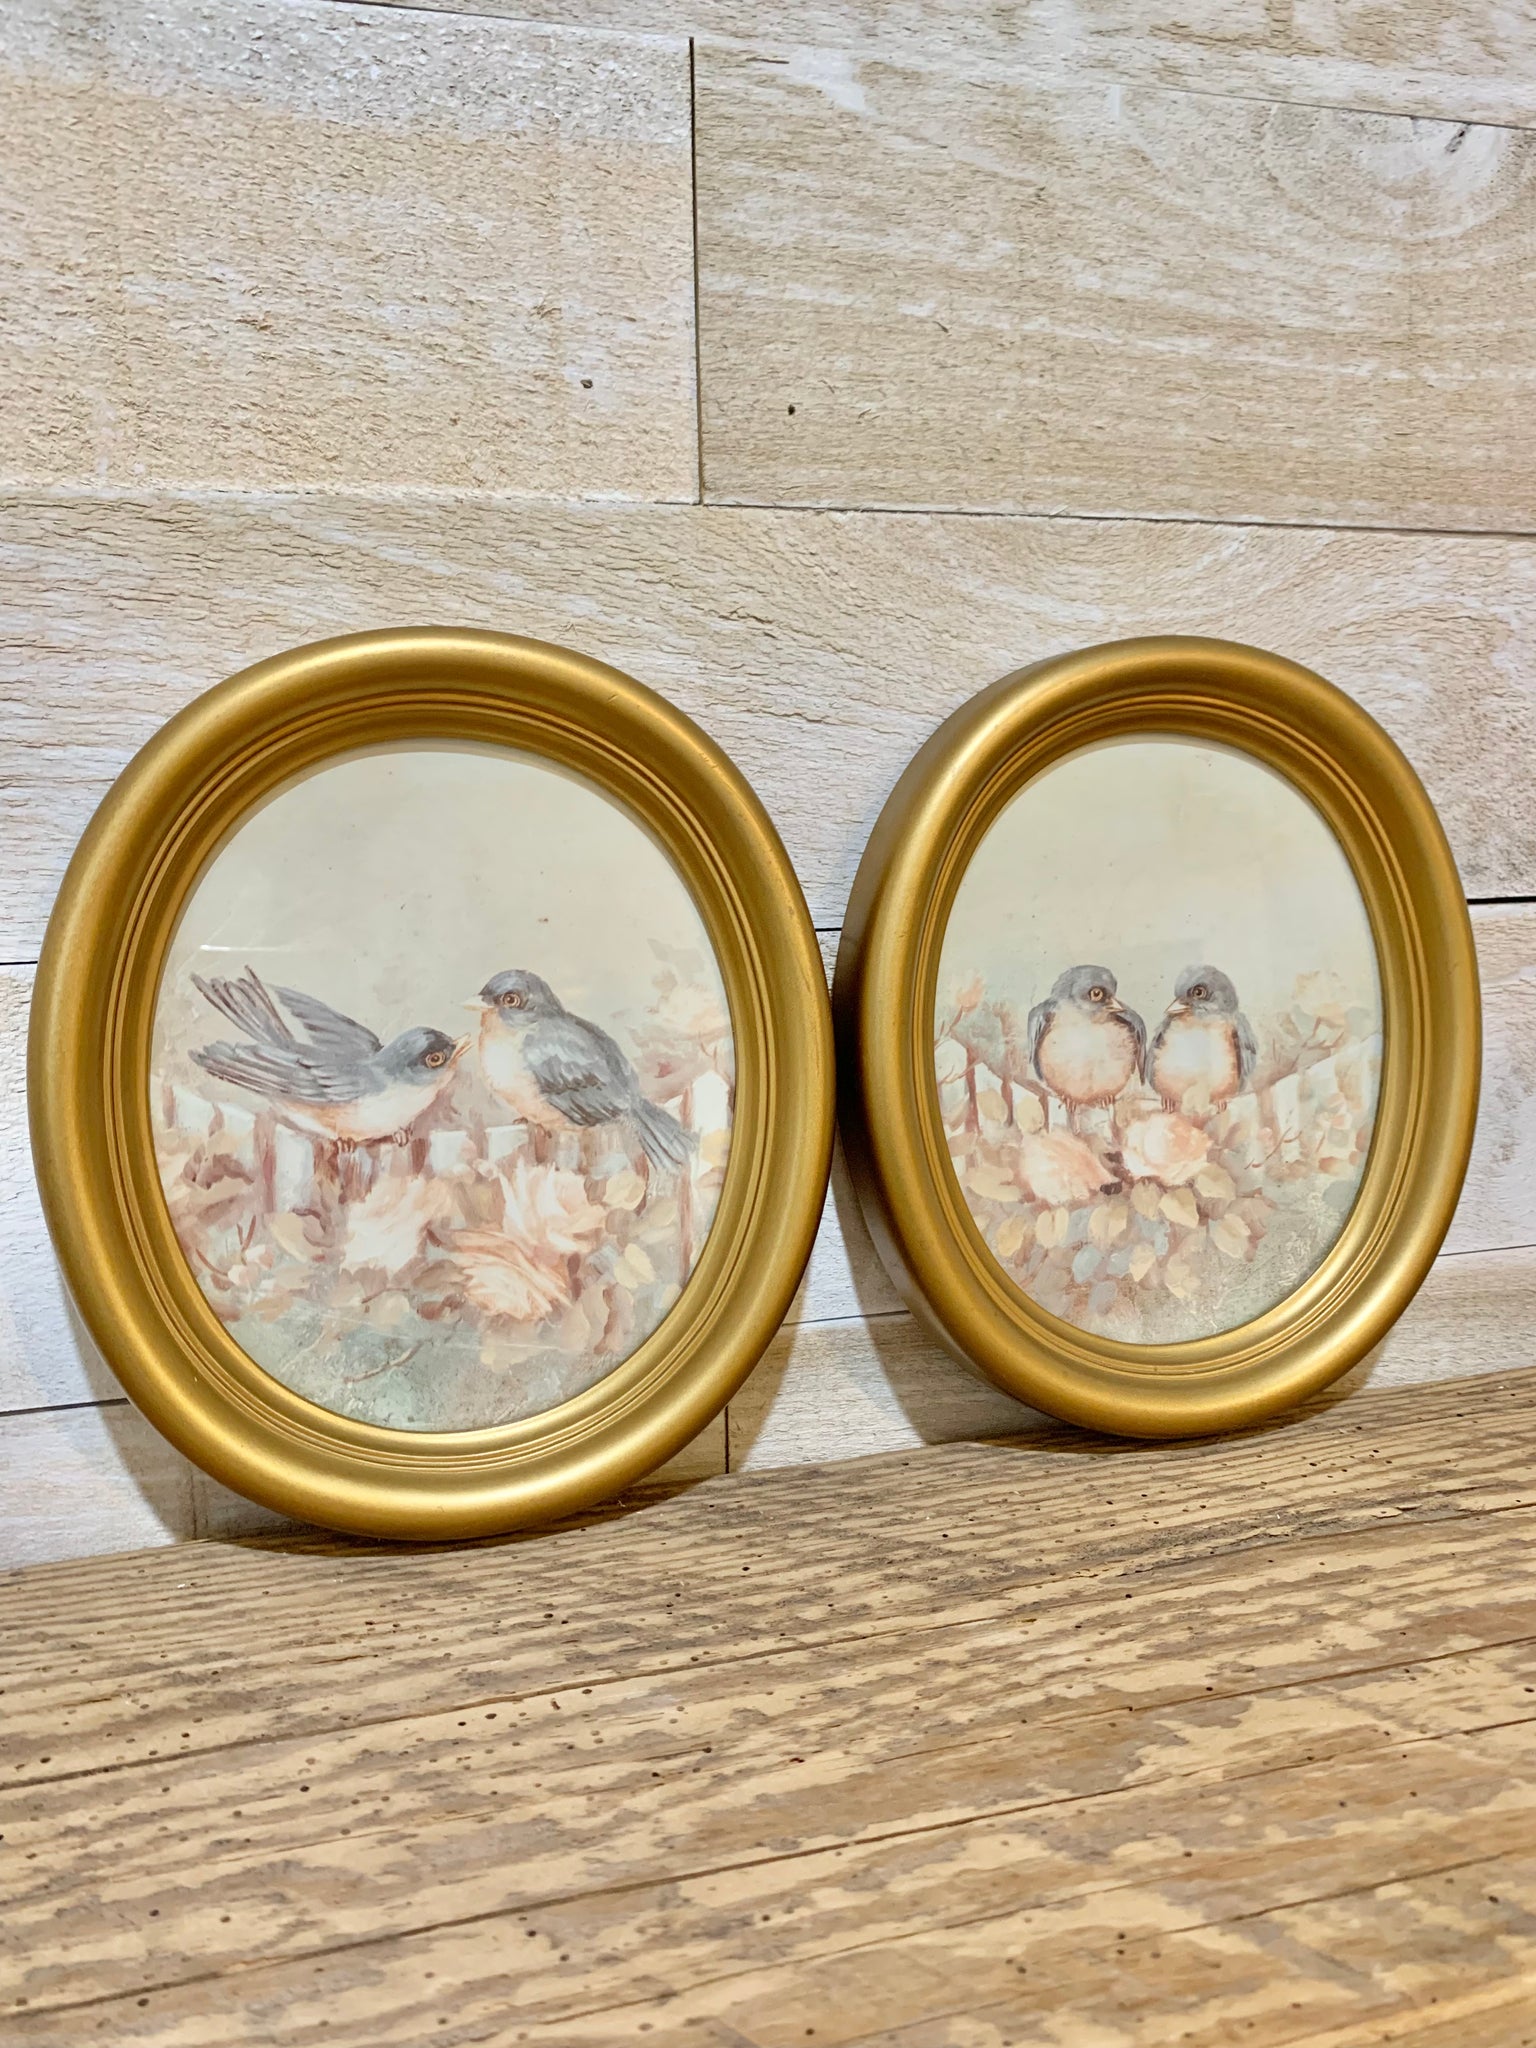 2 Vintage oval bird pictures